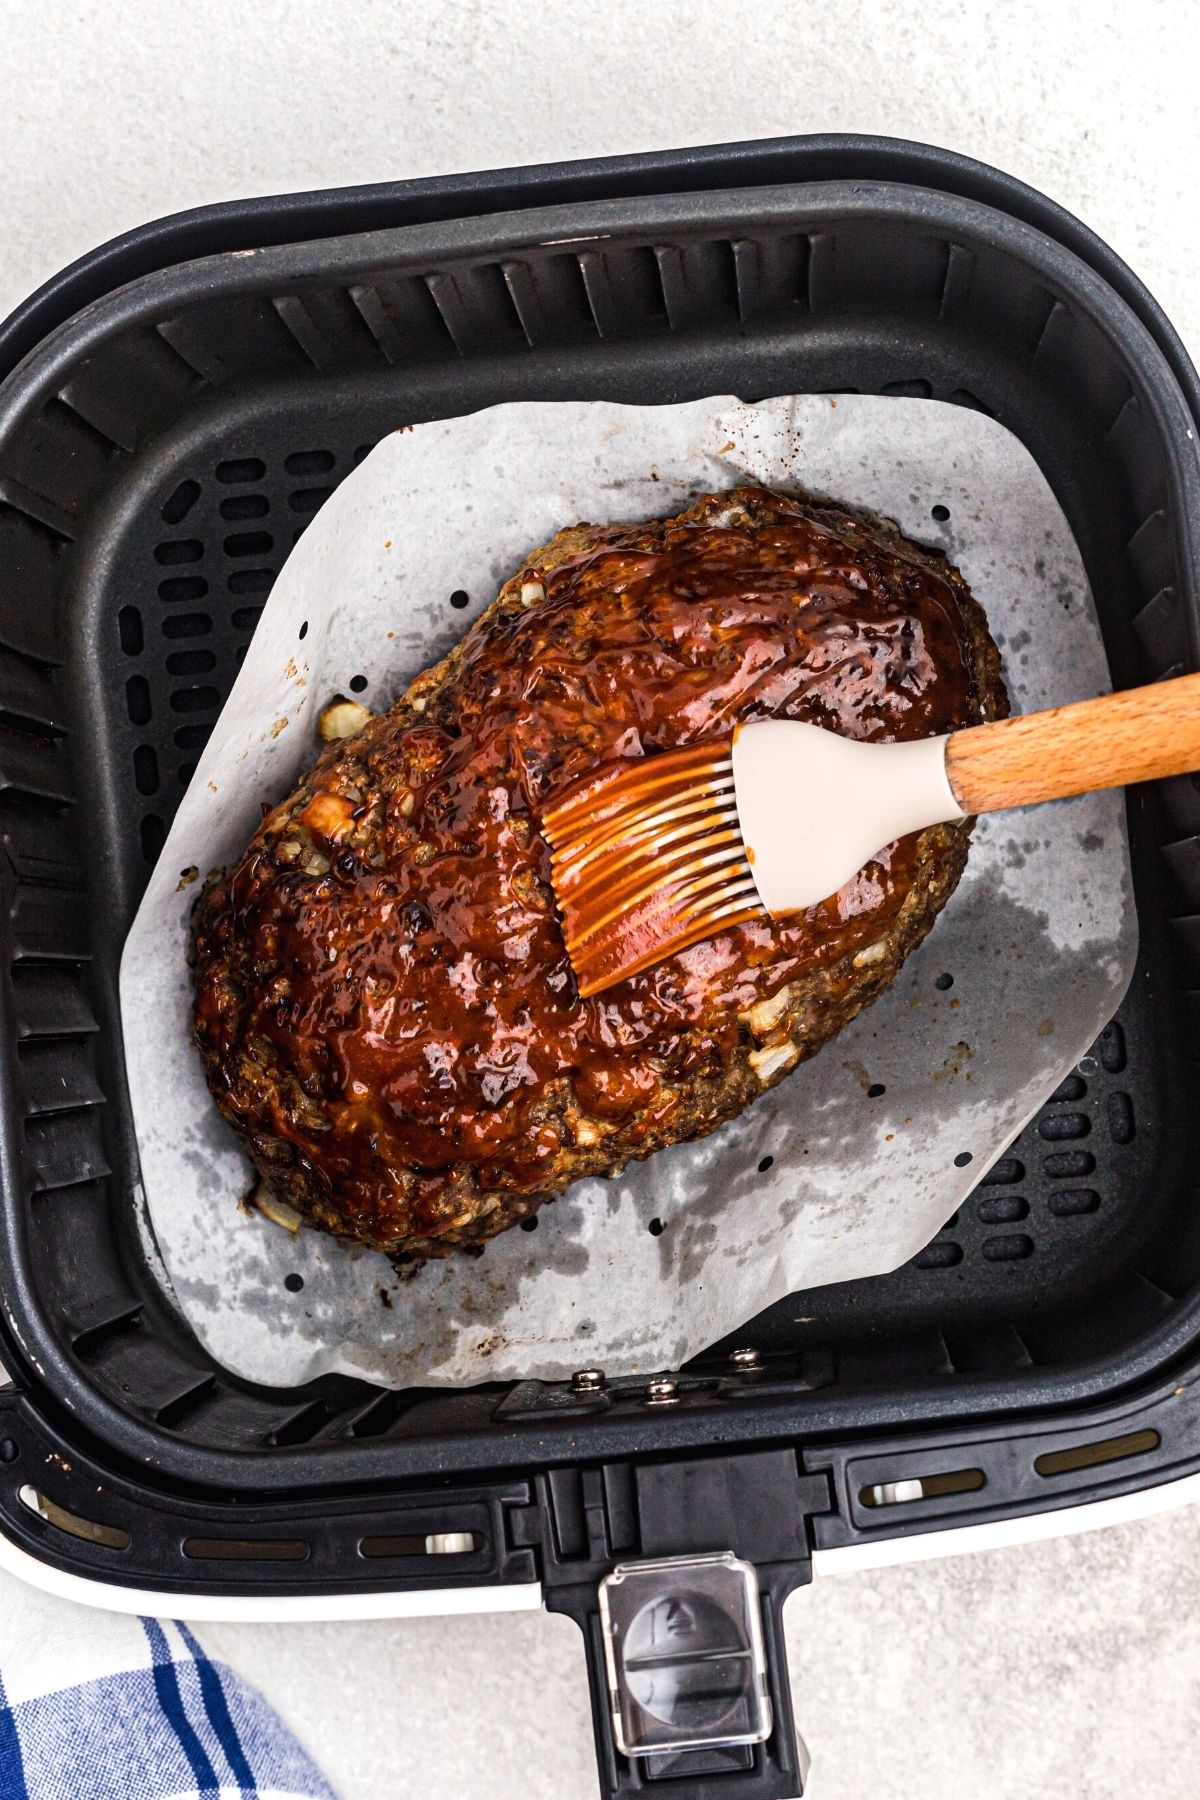 Brushing sauce to top meatloaf in the air fryer basket.